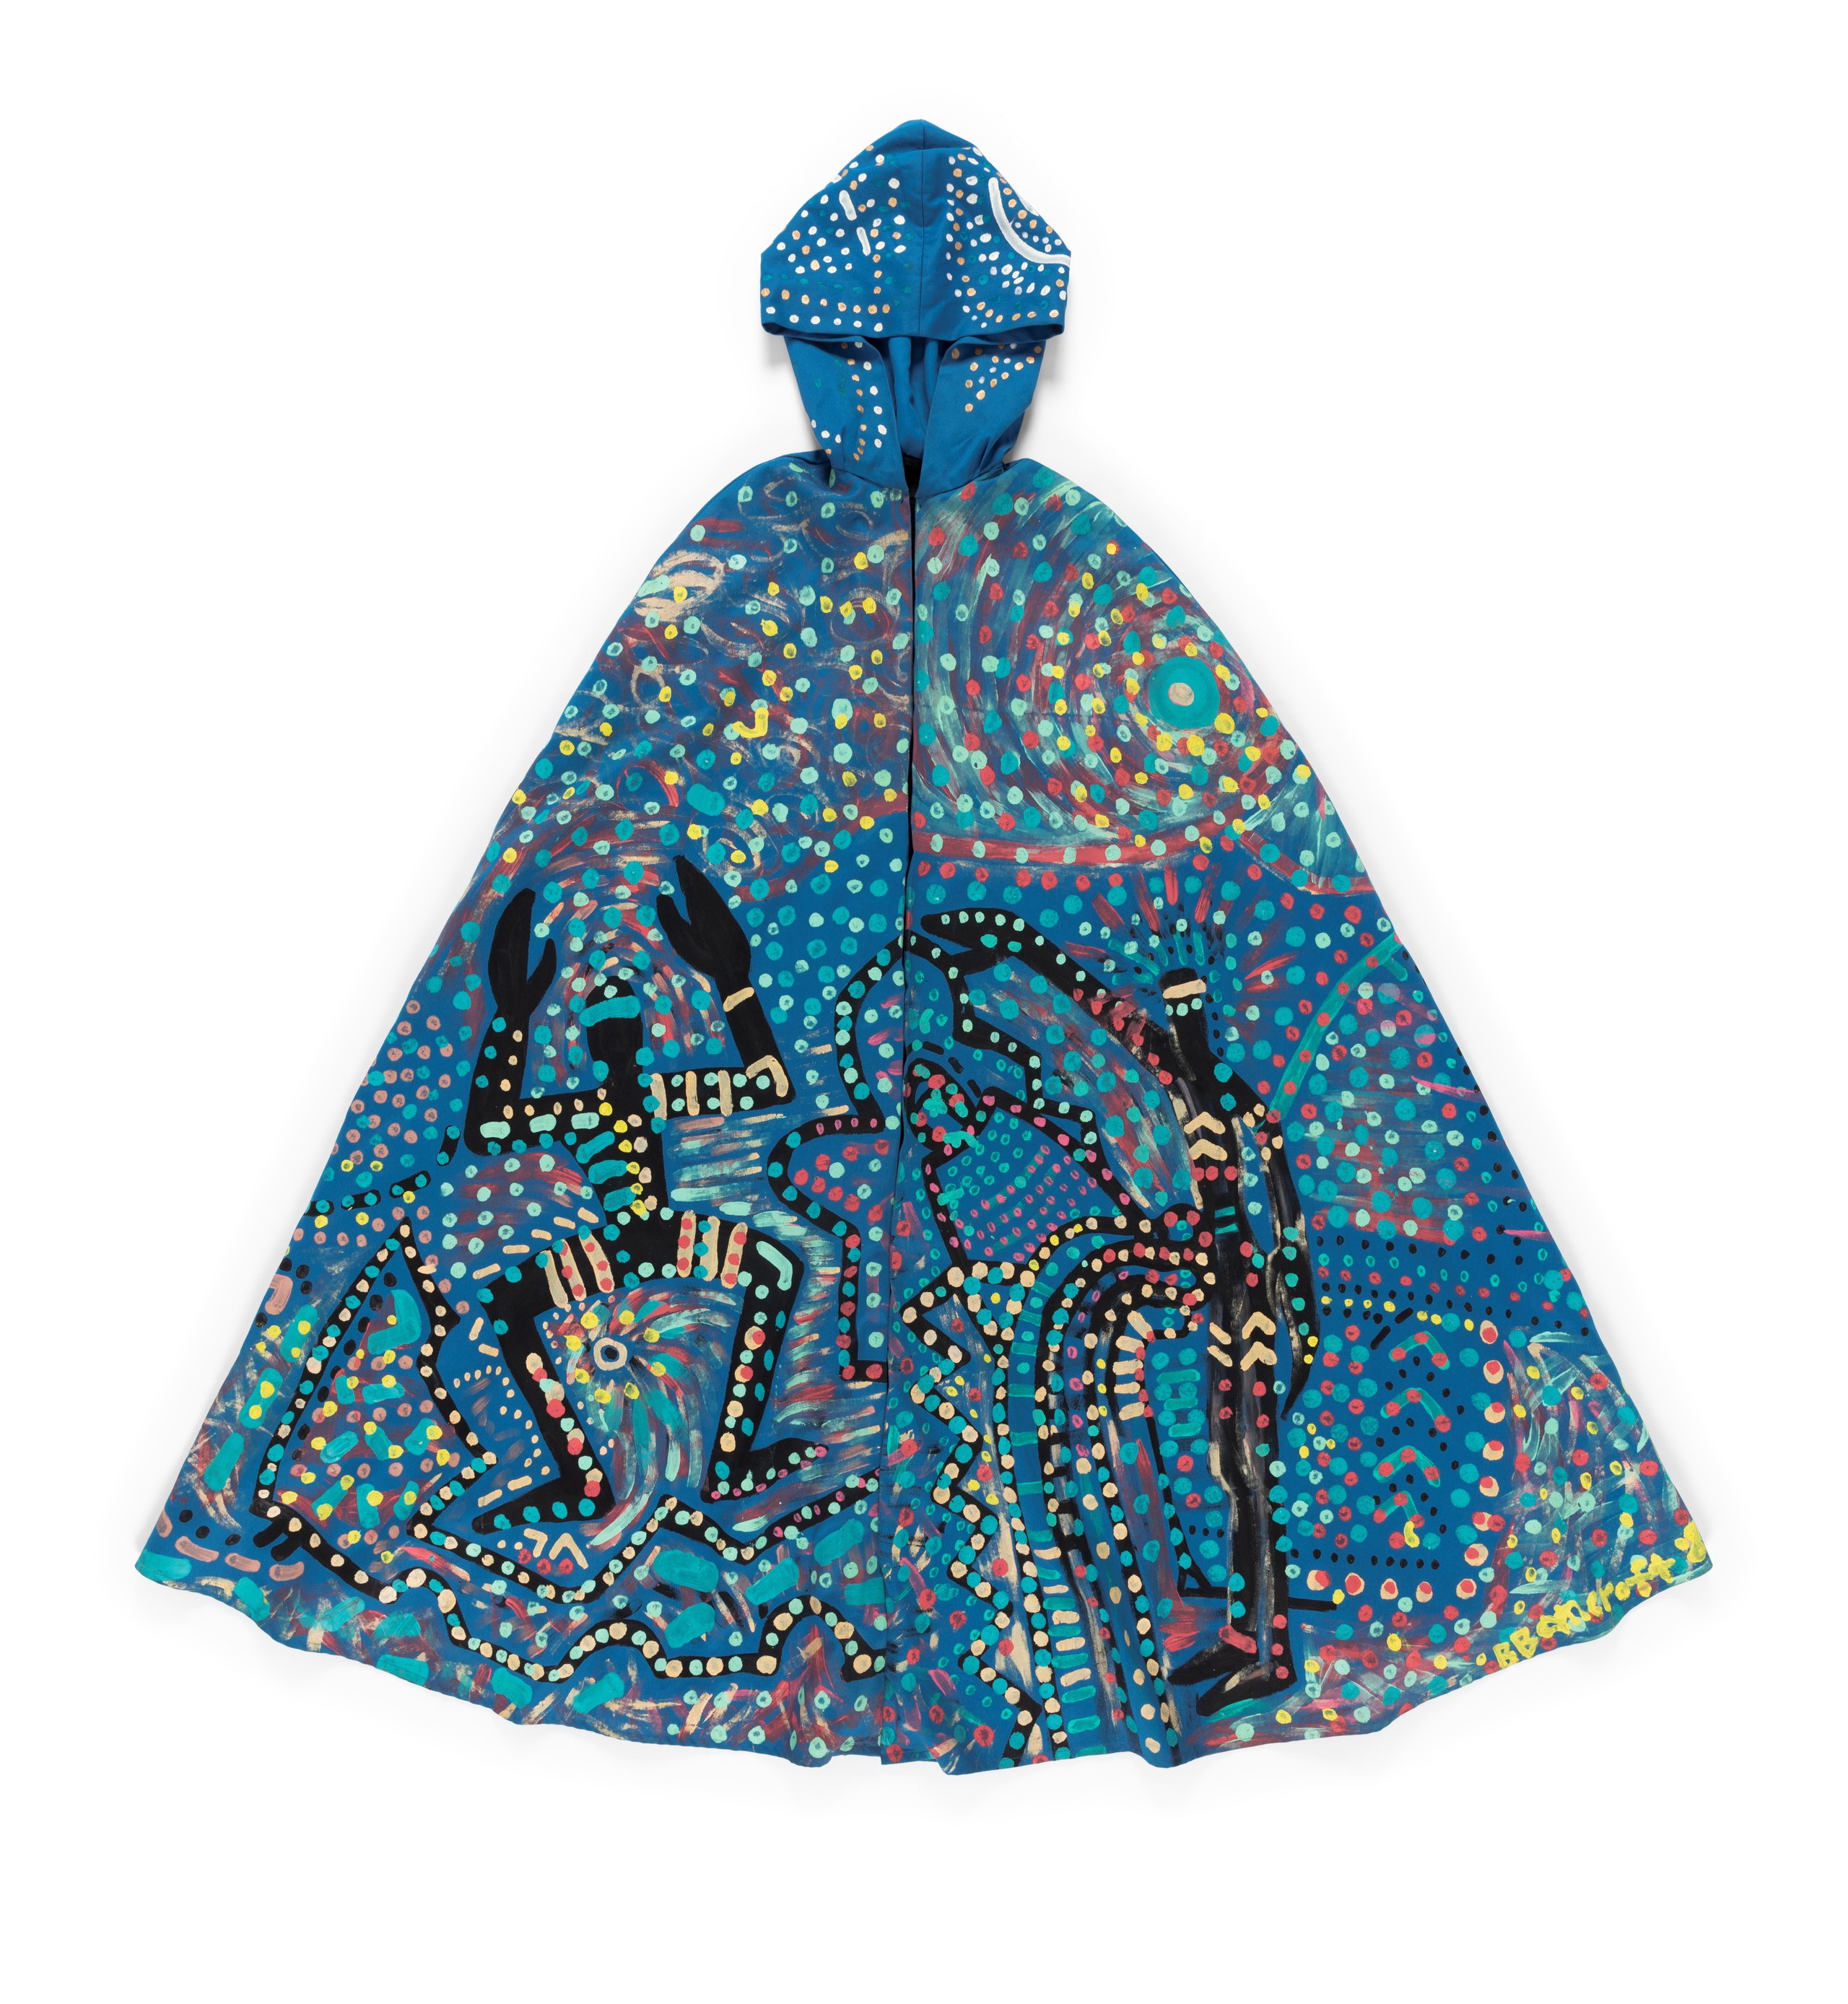 Handpainted 'Cycle of Life' opera cape by Bronwyn Bancroft